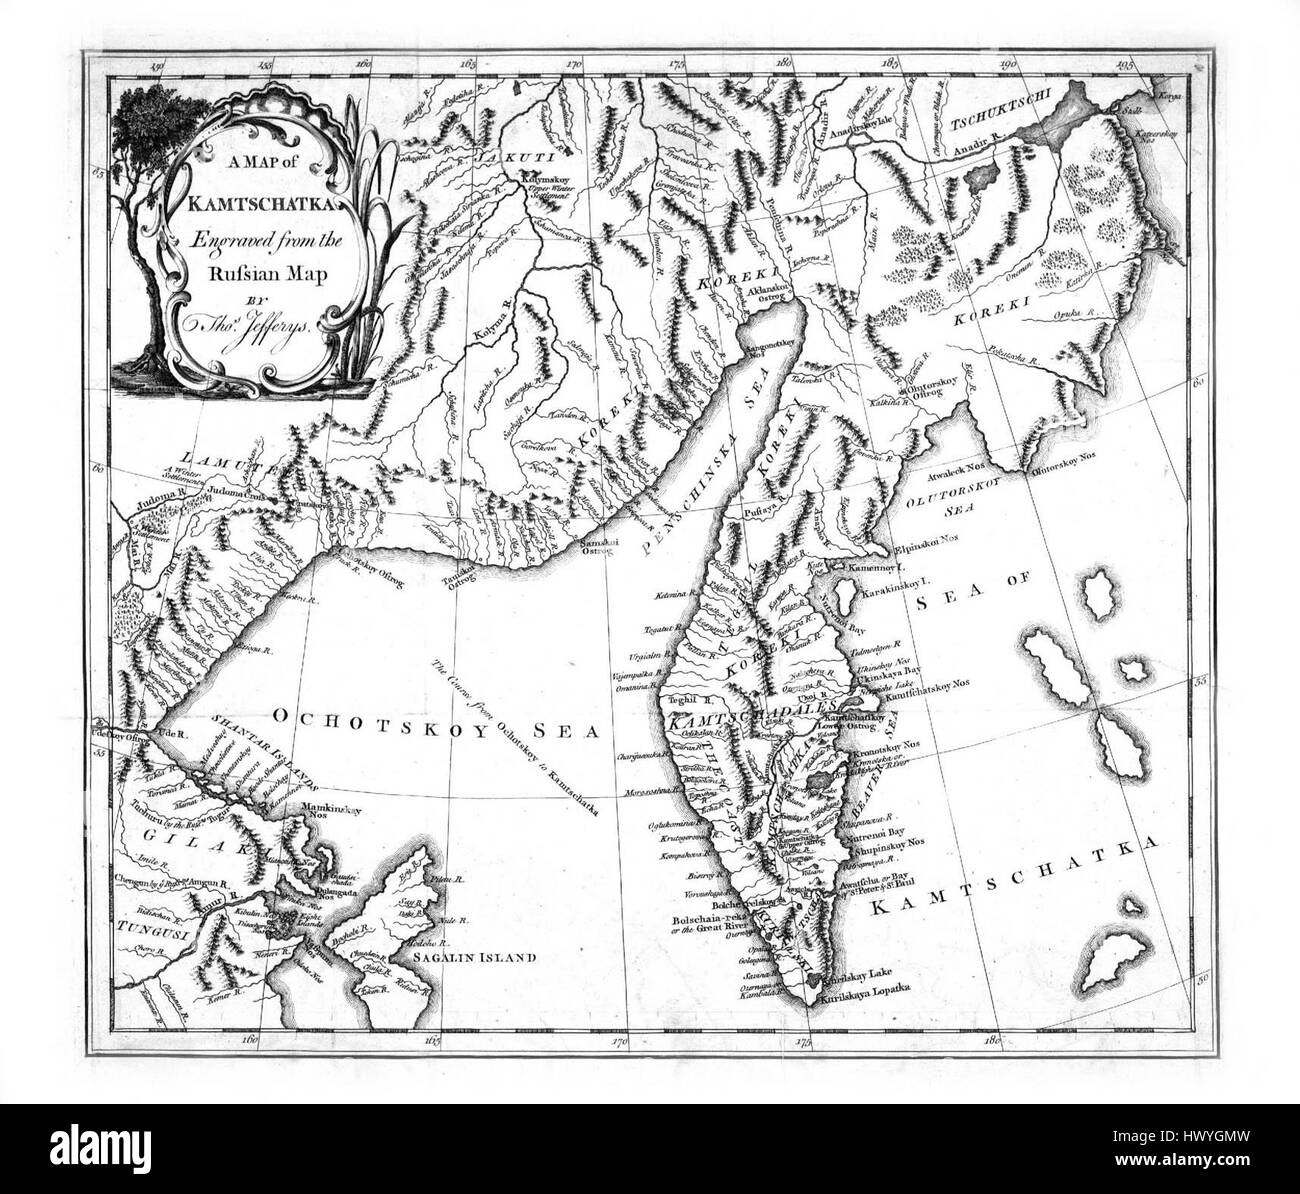 A map of Kamtschatka engraved from the russian map by Tho Jefferys Stock Photo